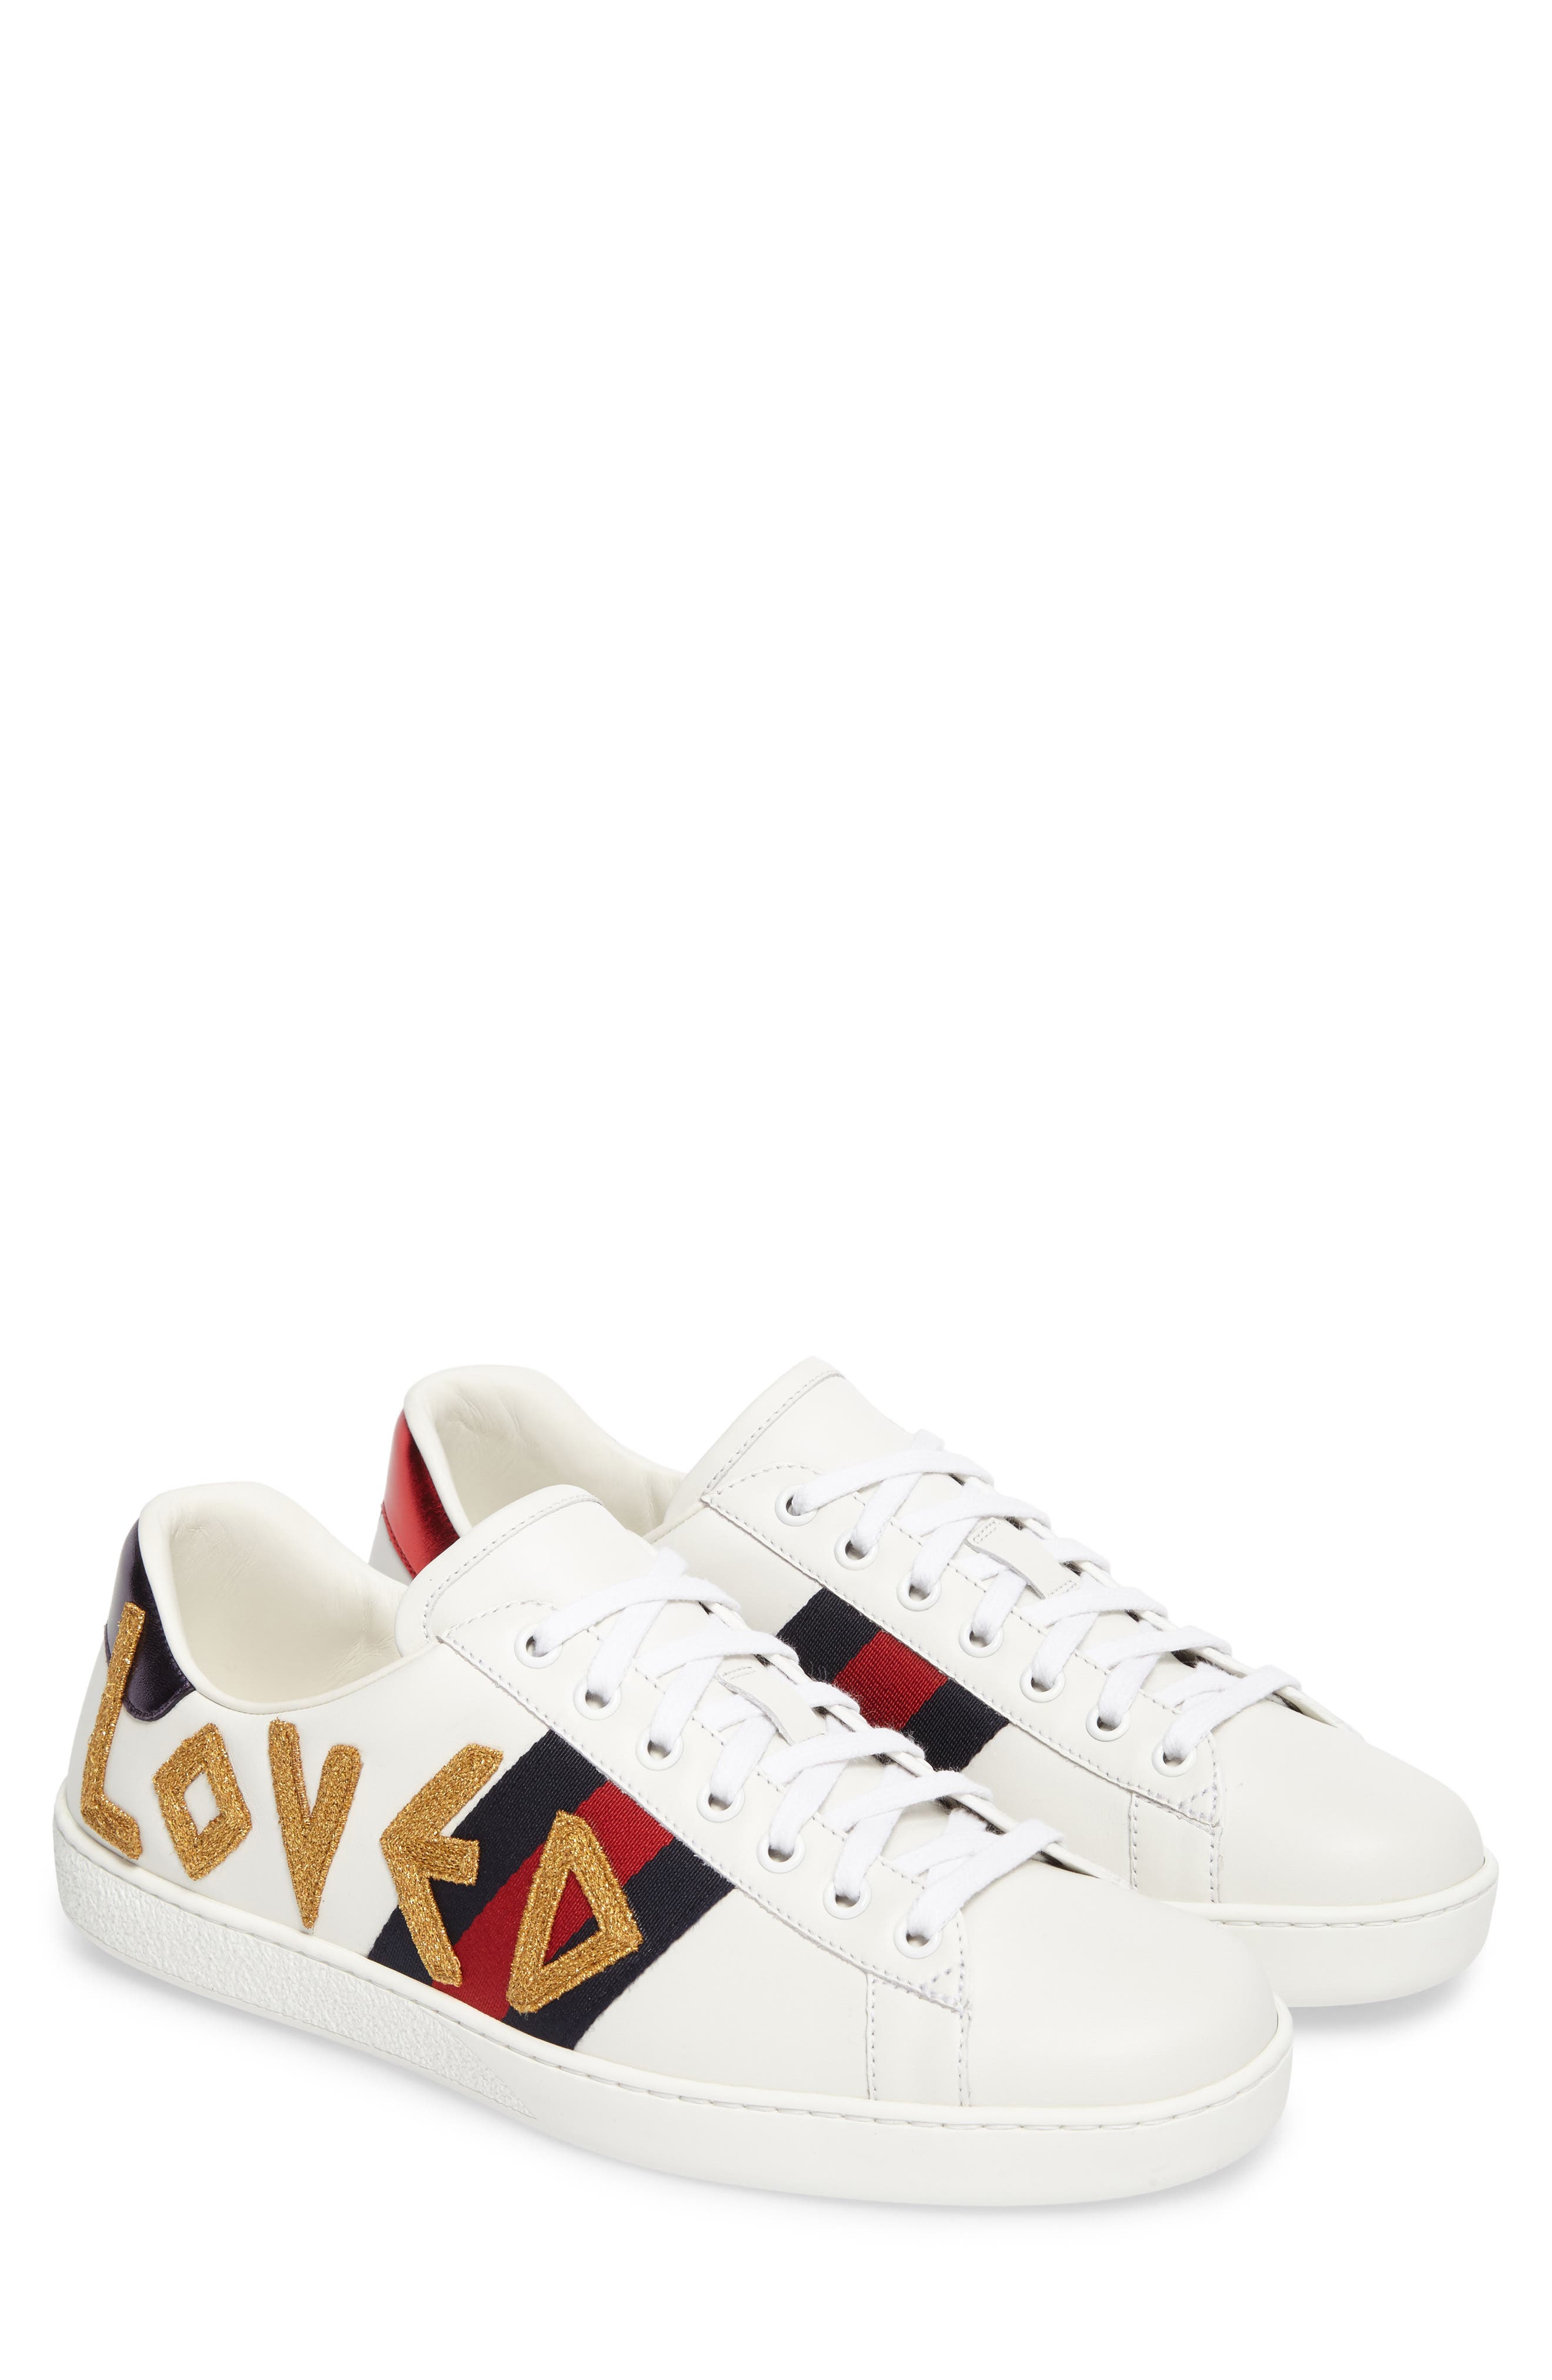 ace embroidered sneaker